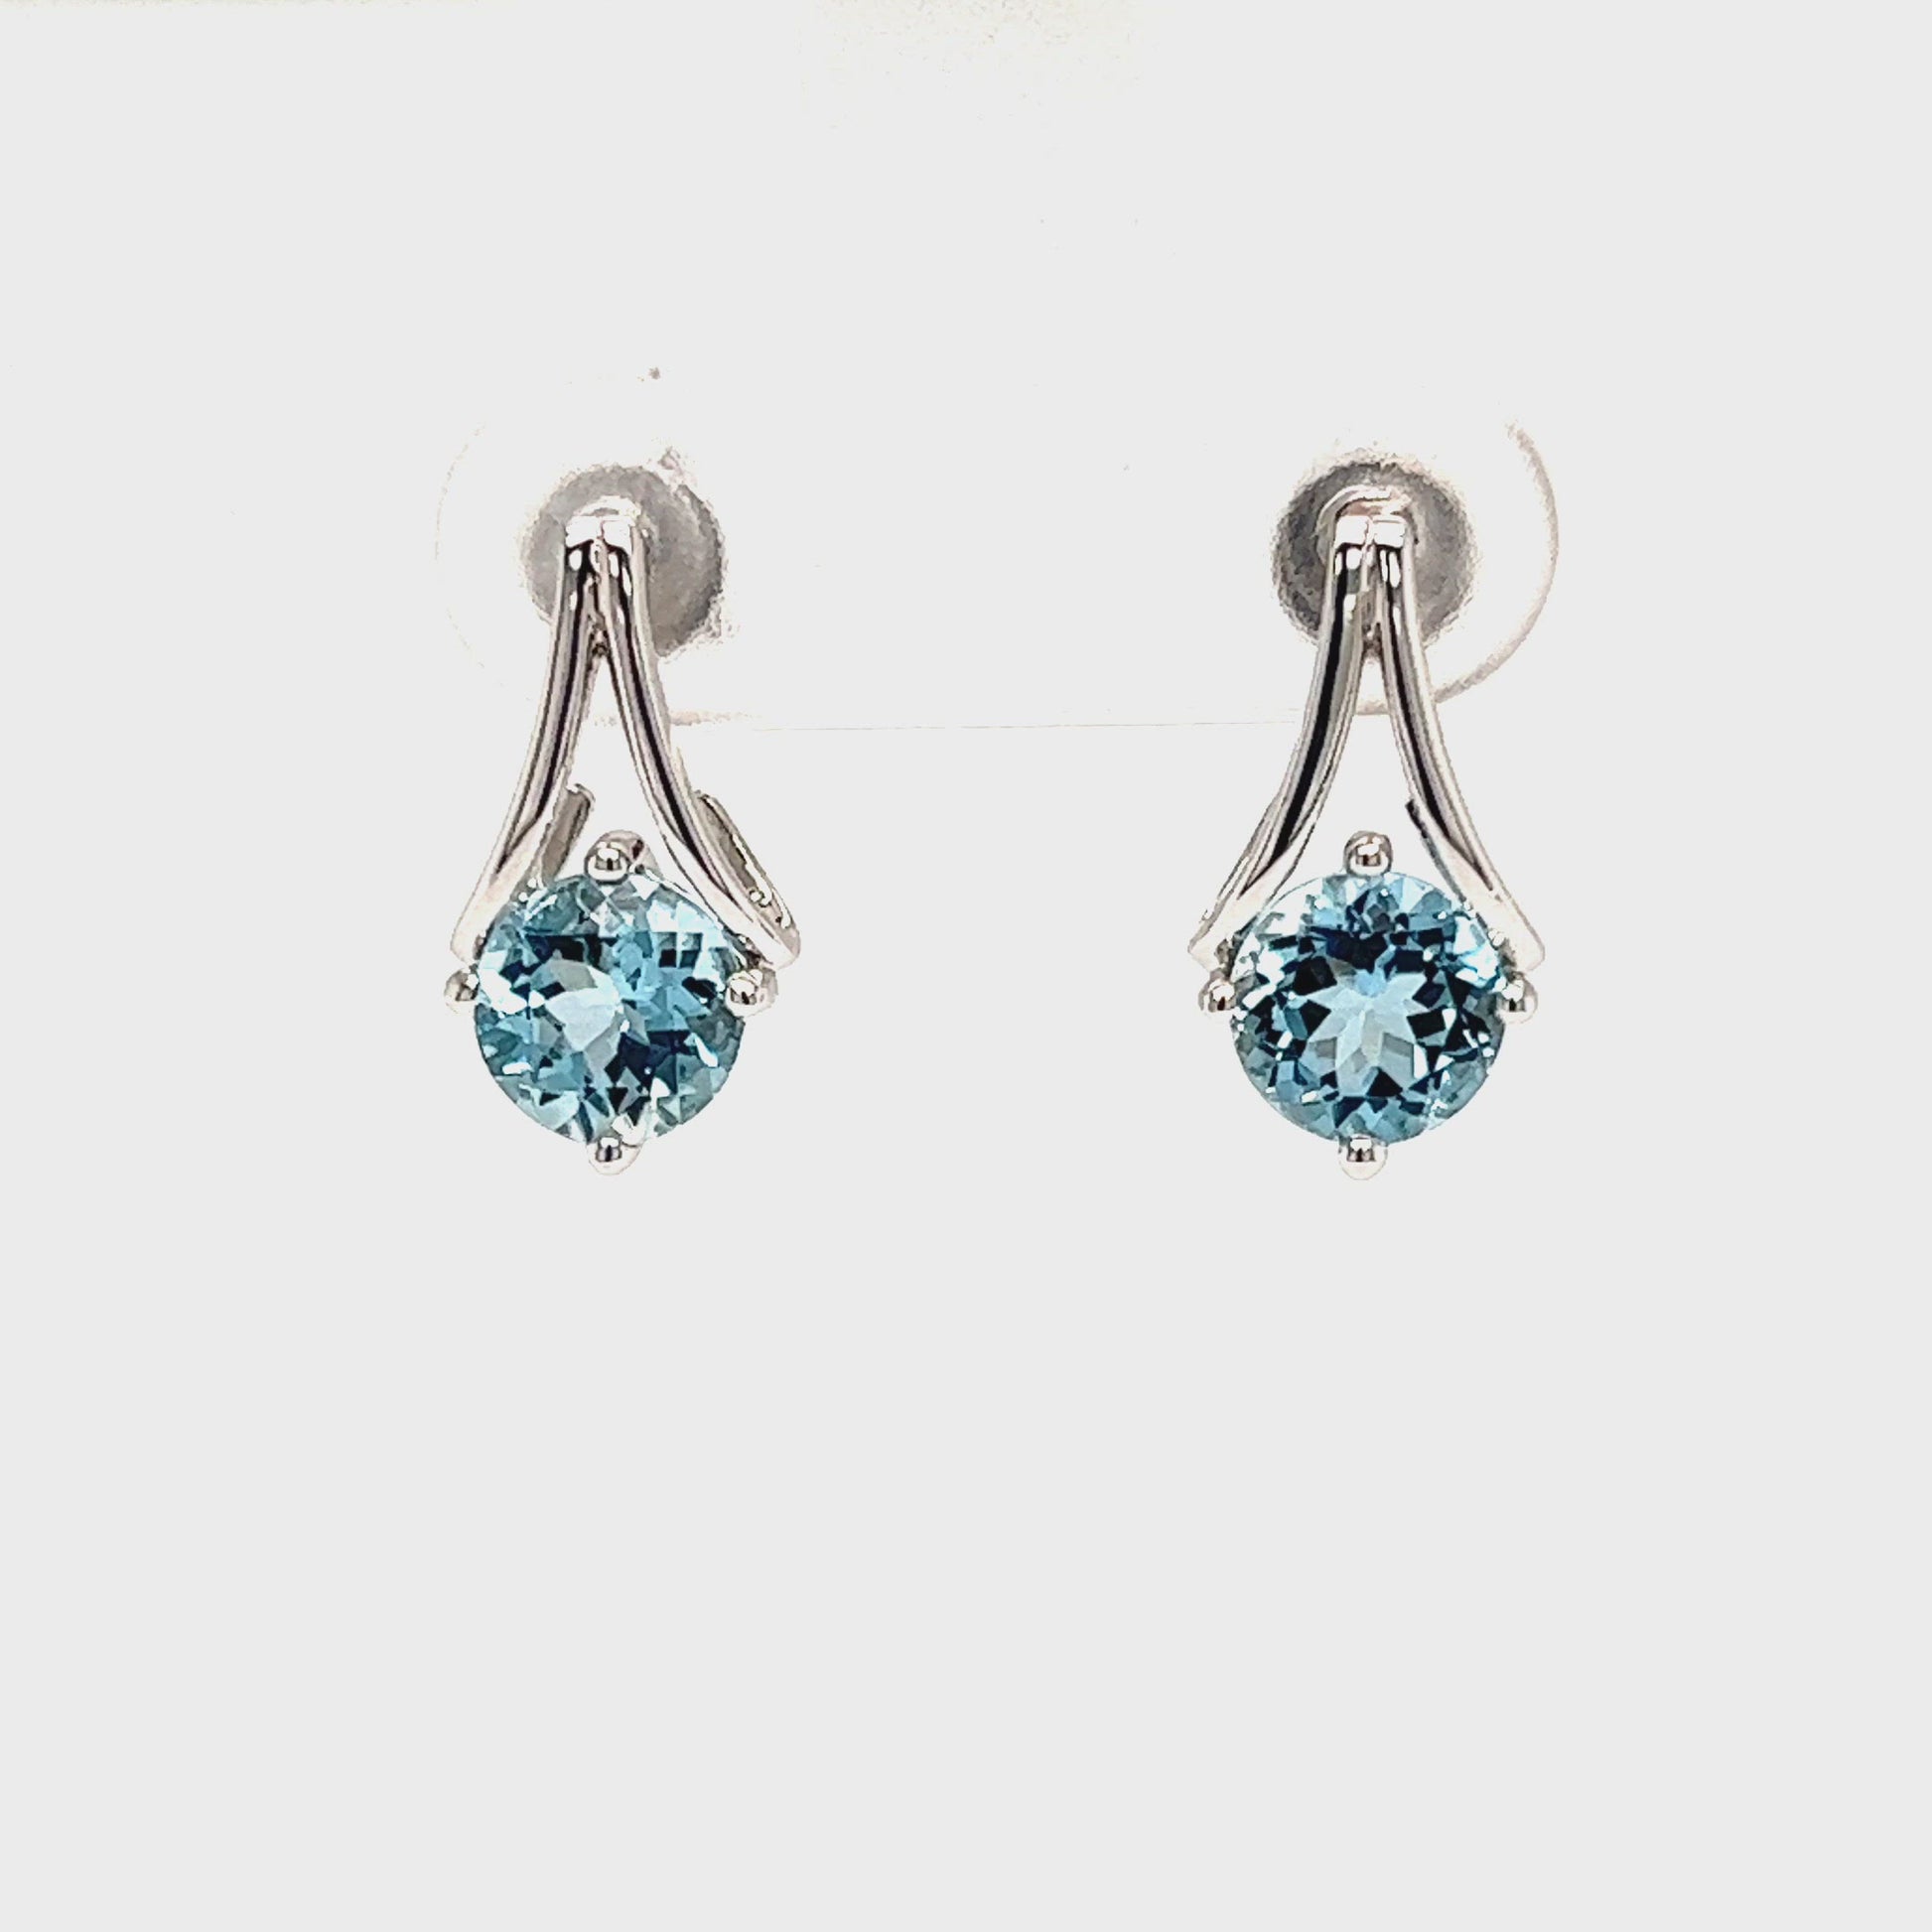 Round Aquamarine Earrings with V-Shaped Bars in 14K White Gold Video